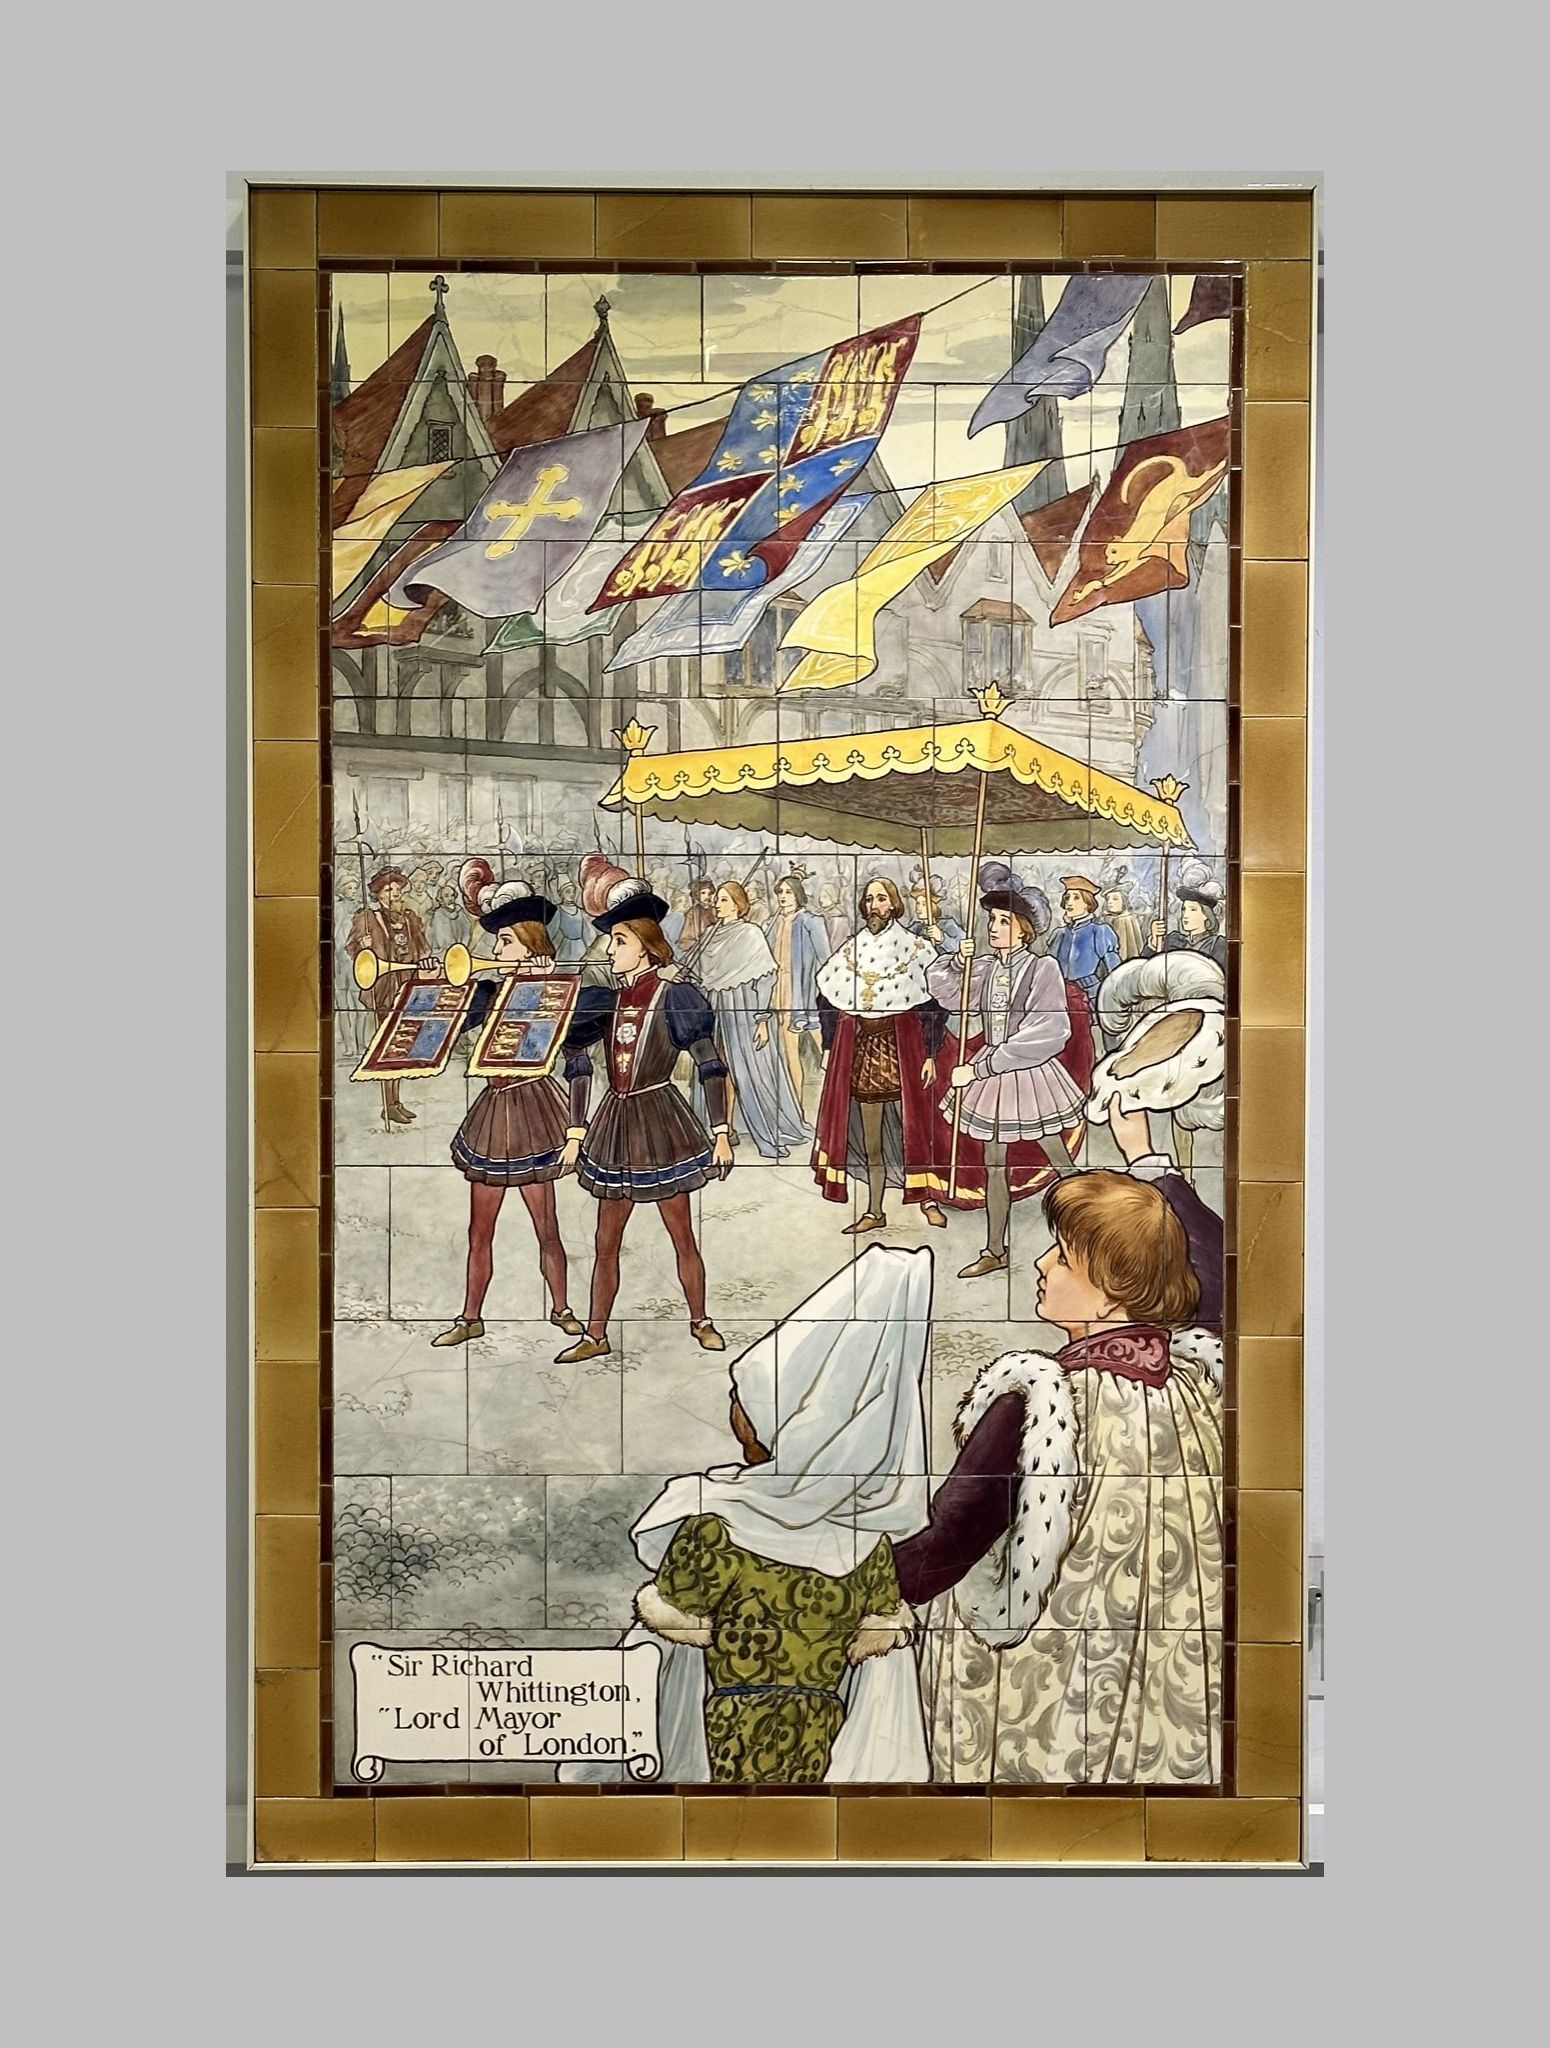 Dick Whittington And His Cat scene painted on Doulton tiles (commissioned around 1900) from the Evelina Children's Hospital displayed in the long corridor of St Thomas' hospital.